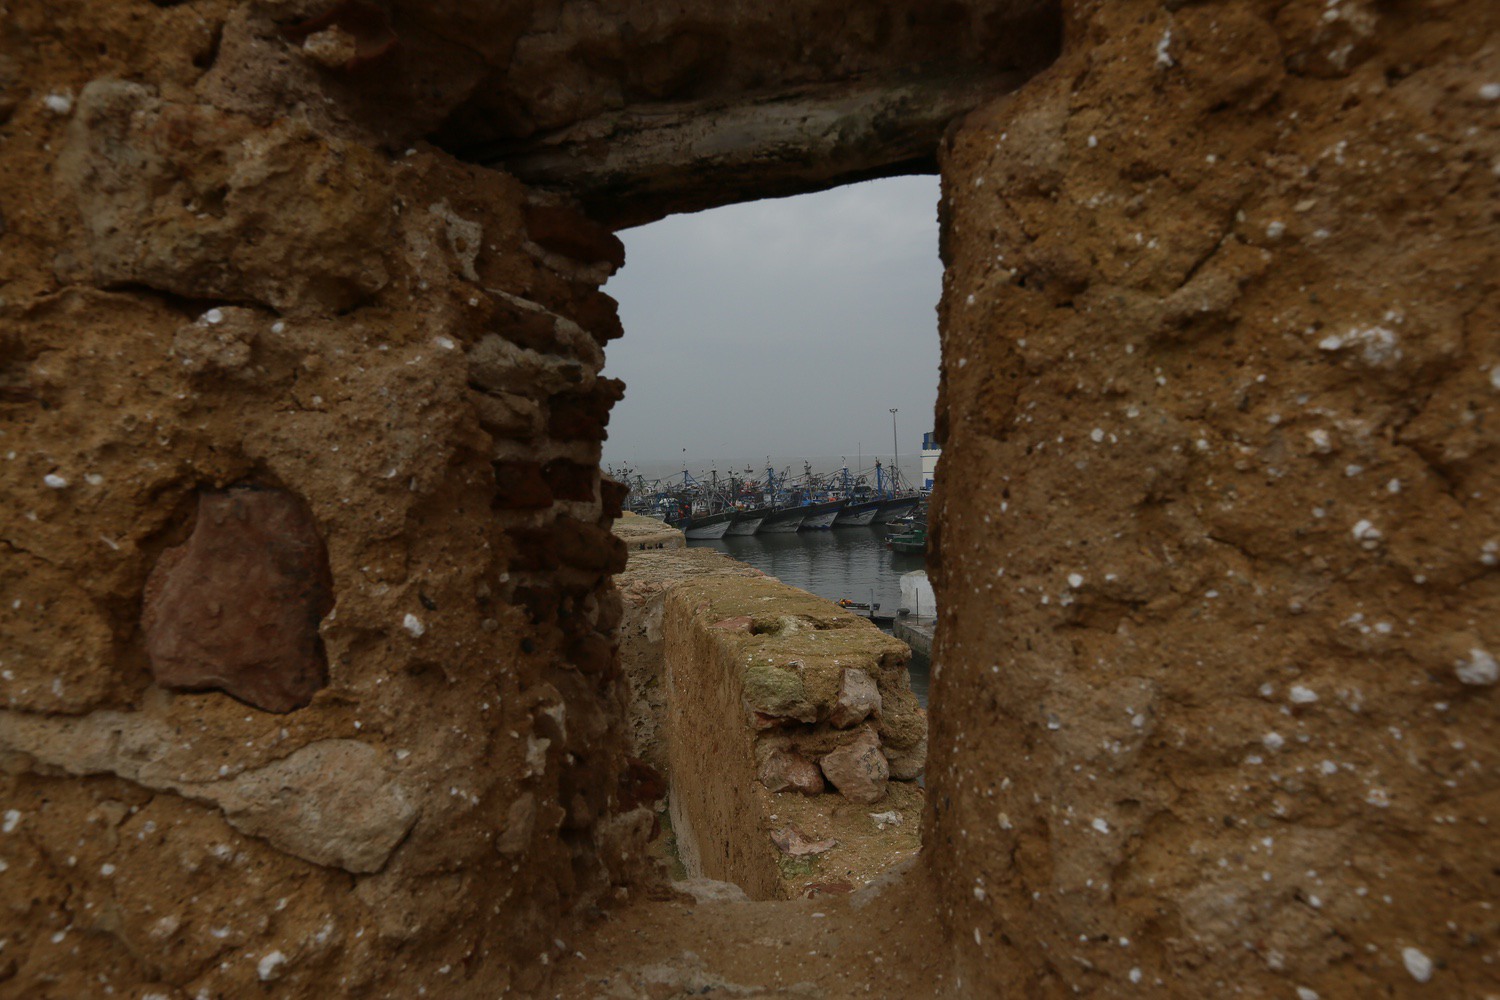 View toward the port through a window in the city walls